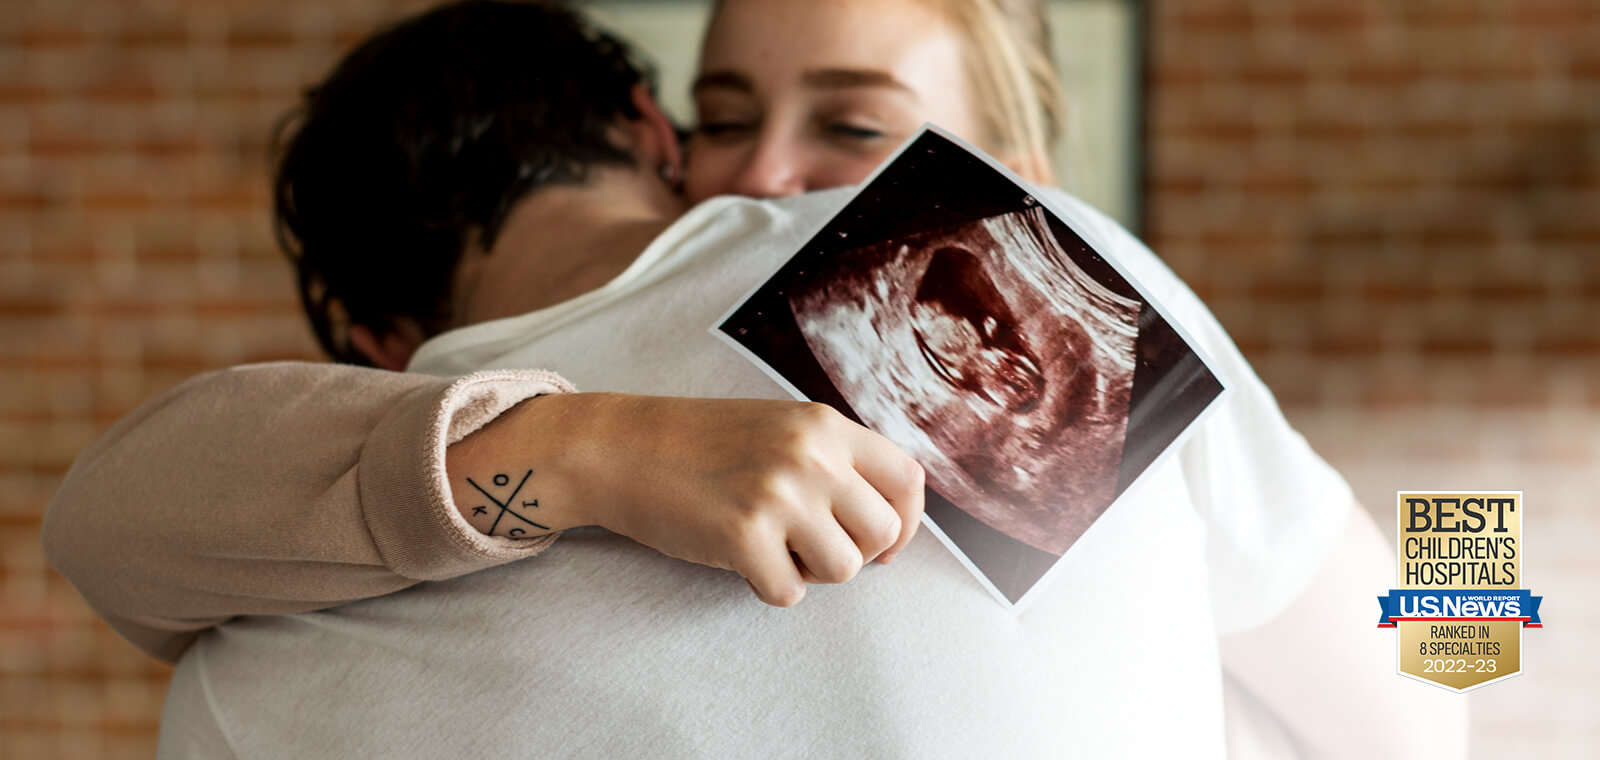 Two people embracing. One person holds image of sonogram depicting baby in a uterus. Awards badge for ranking as a best childrens hospital in 8 specialties. 